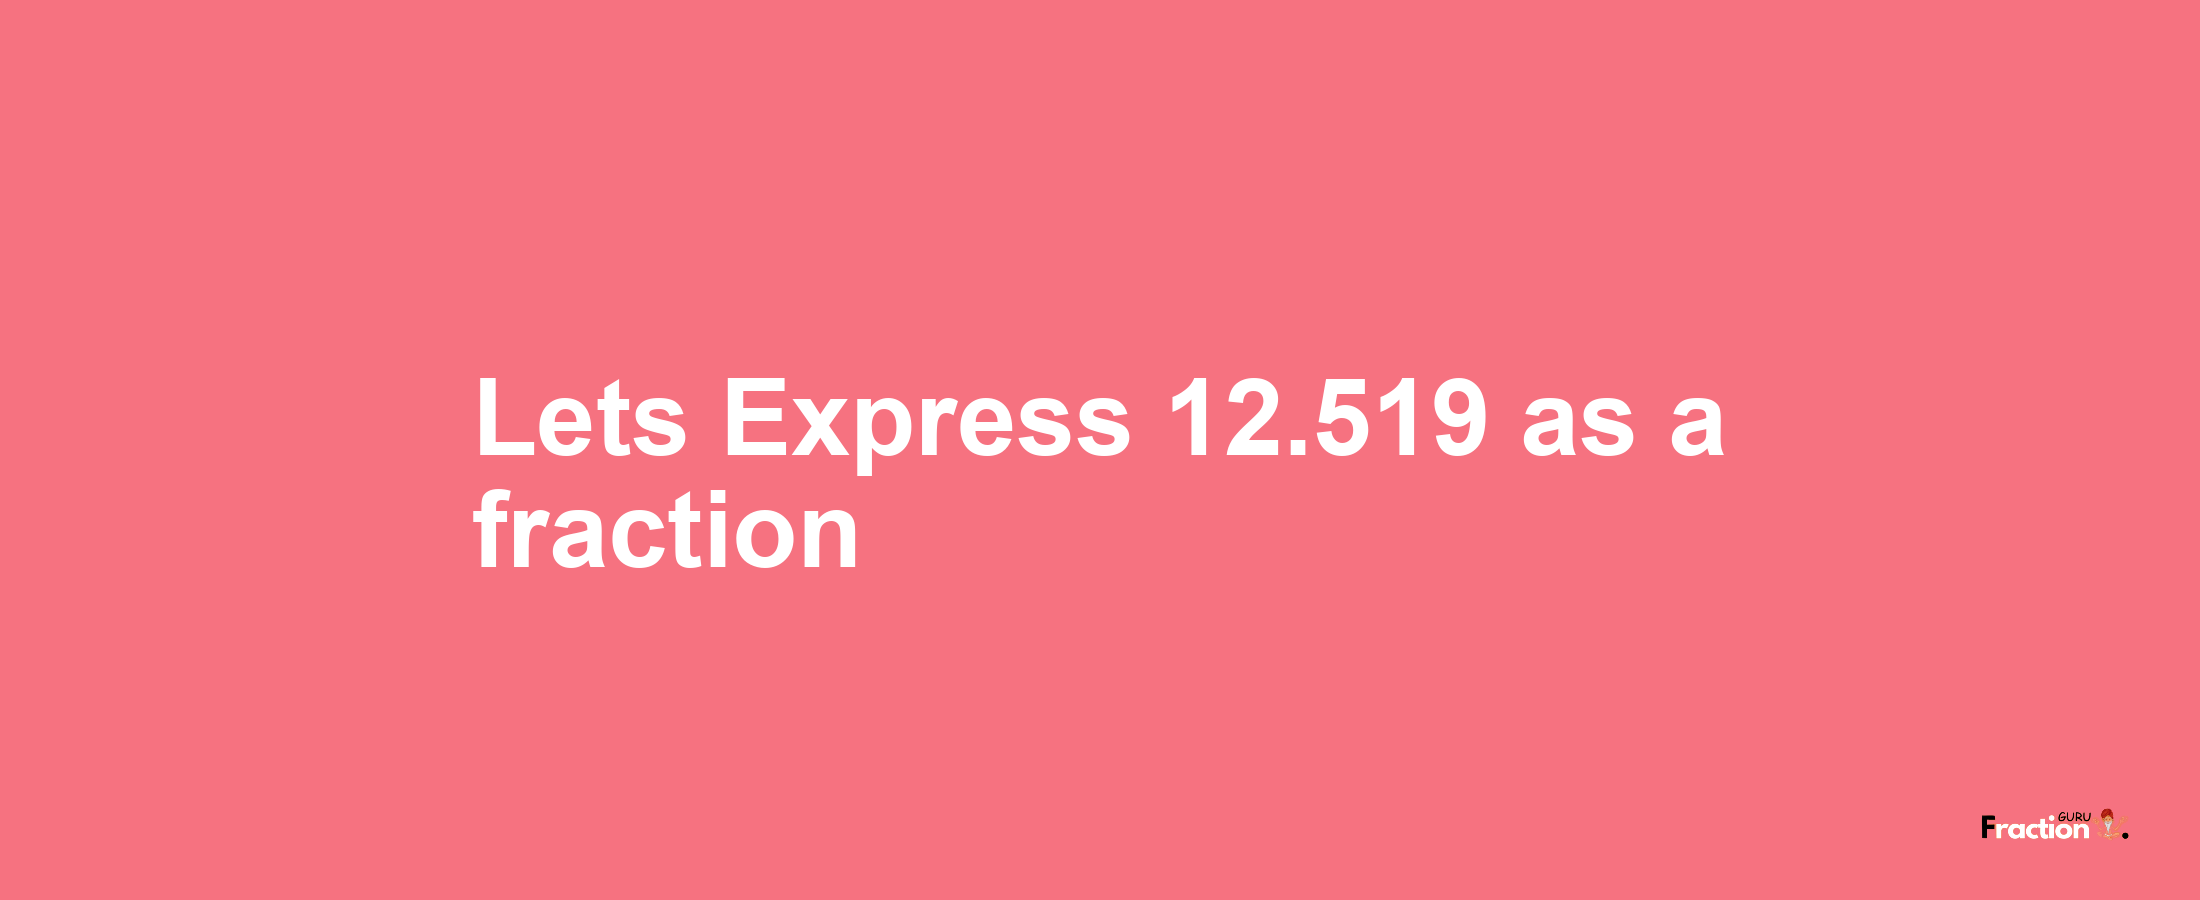 Lets Express 12.519 as afraction